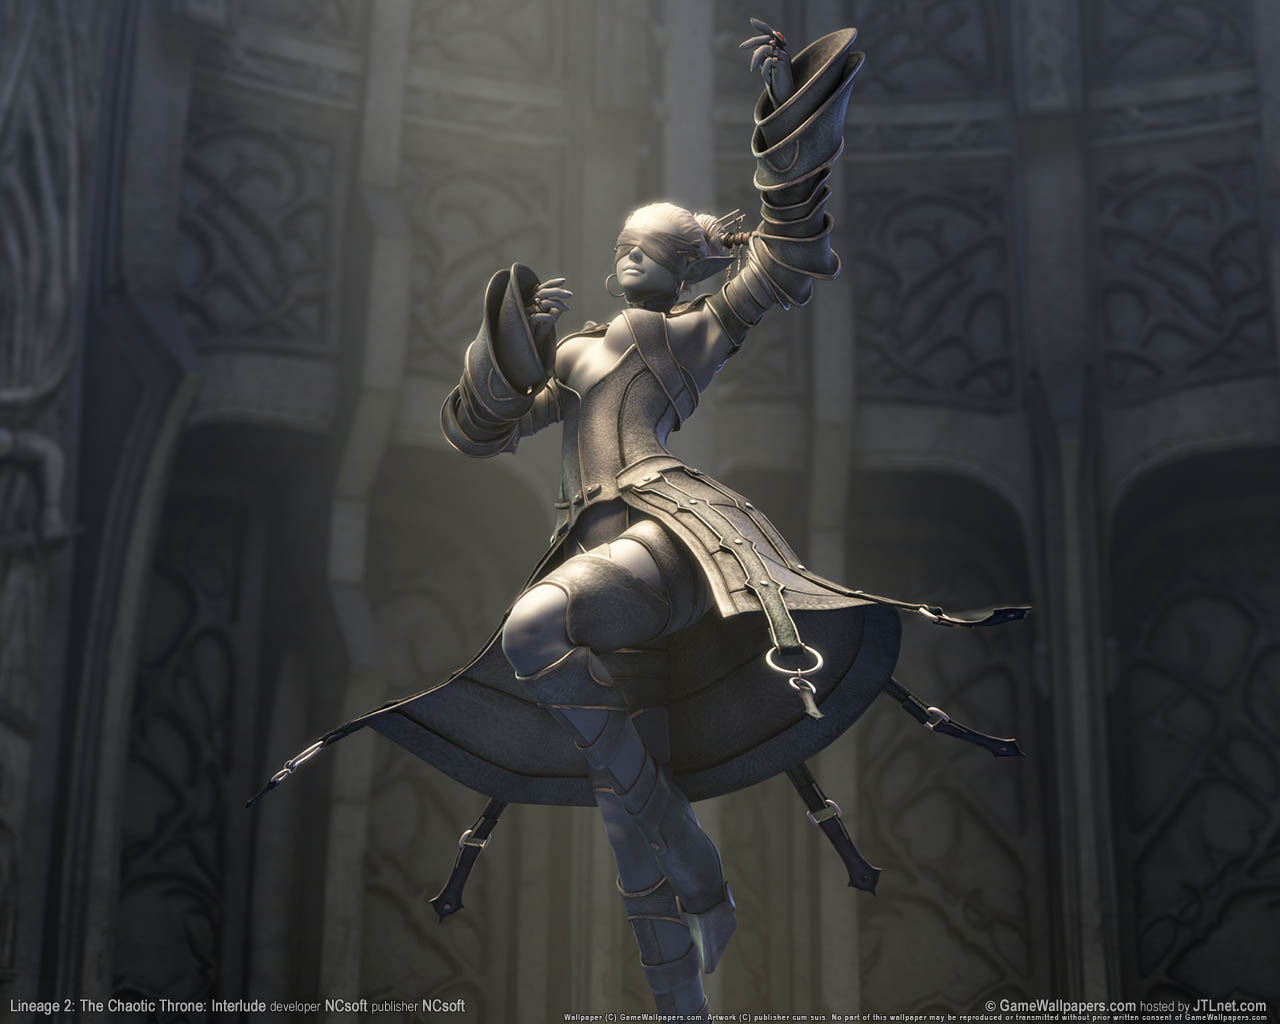 Lineage 2%253A The Chaotic Throne%253A Interlude wallpaper 02 1280x1024